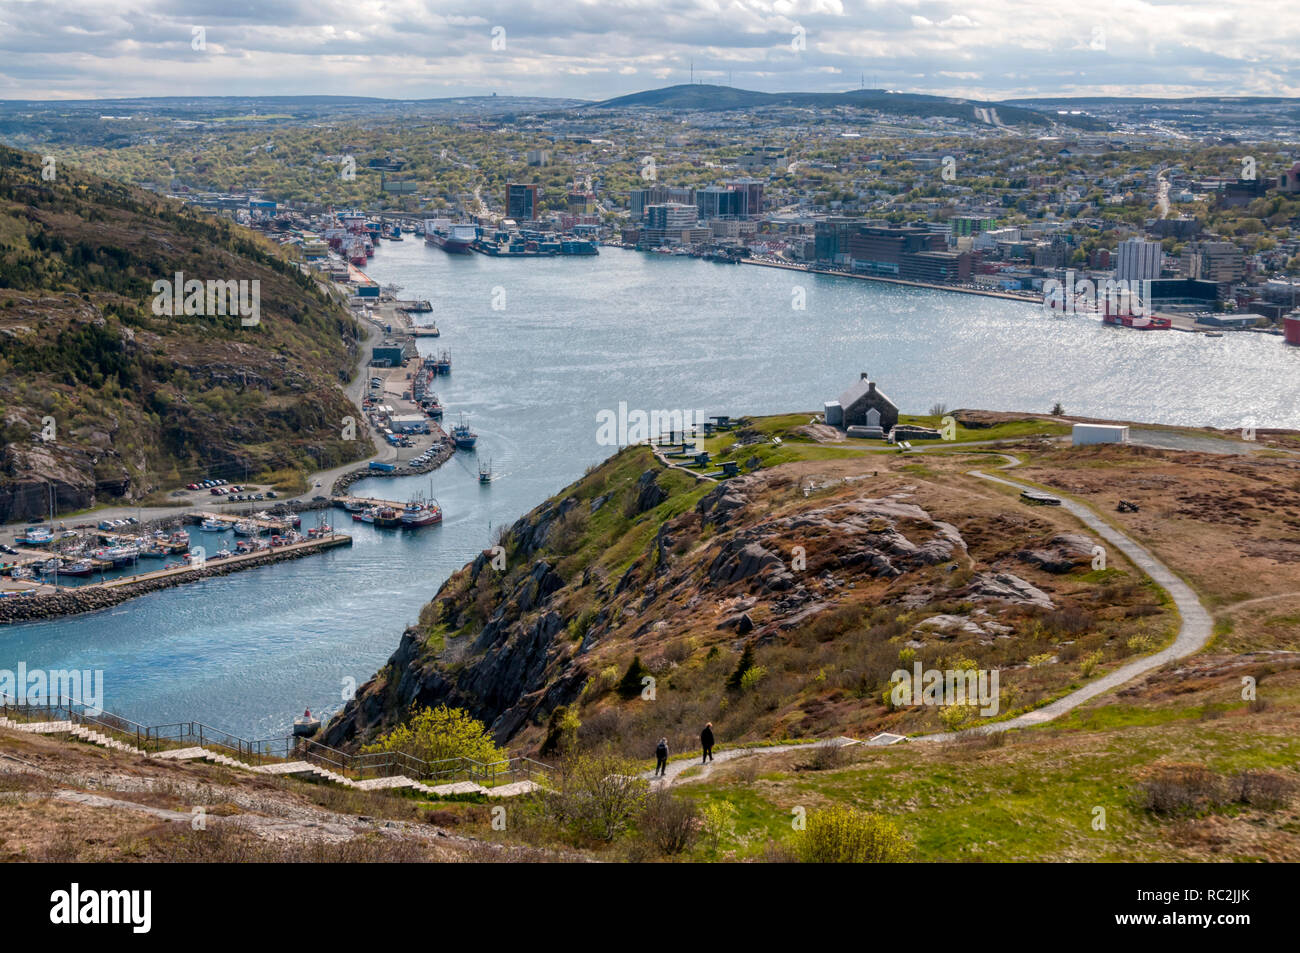 An elevated view of St John's, Newfoundland seen from Signal Hill. Stock Photo